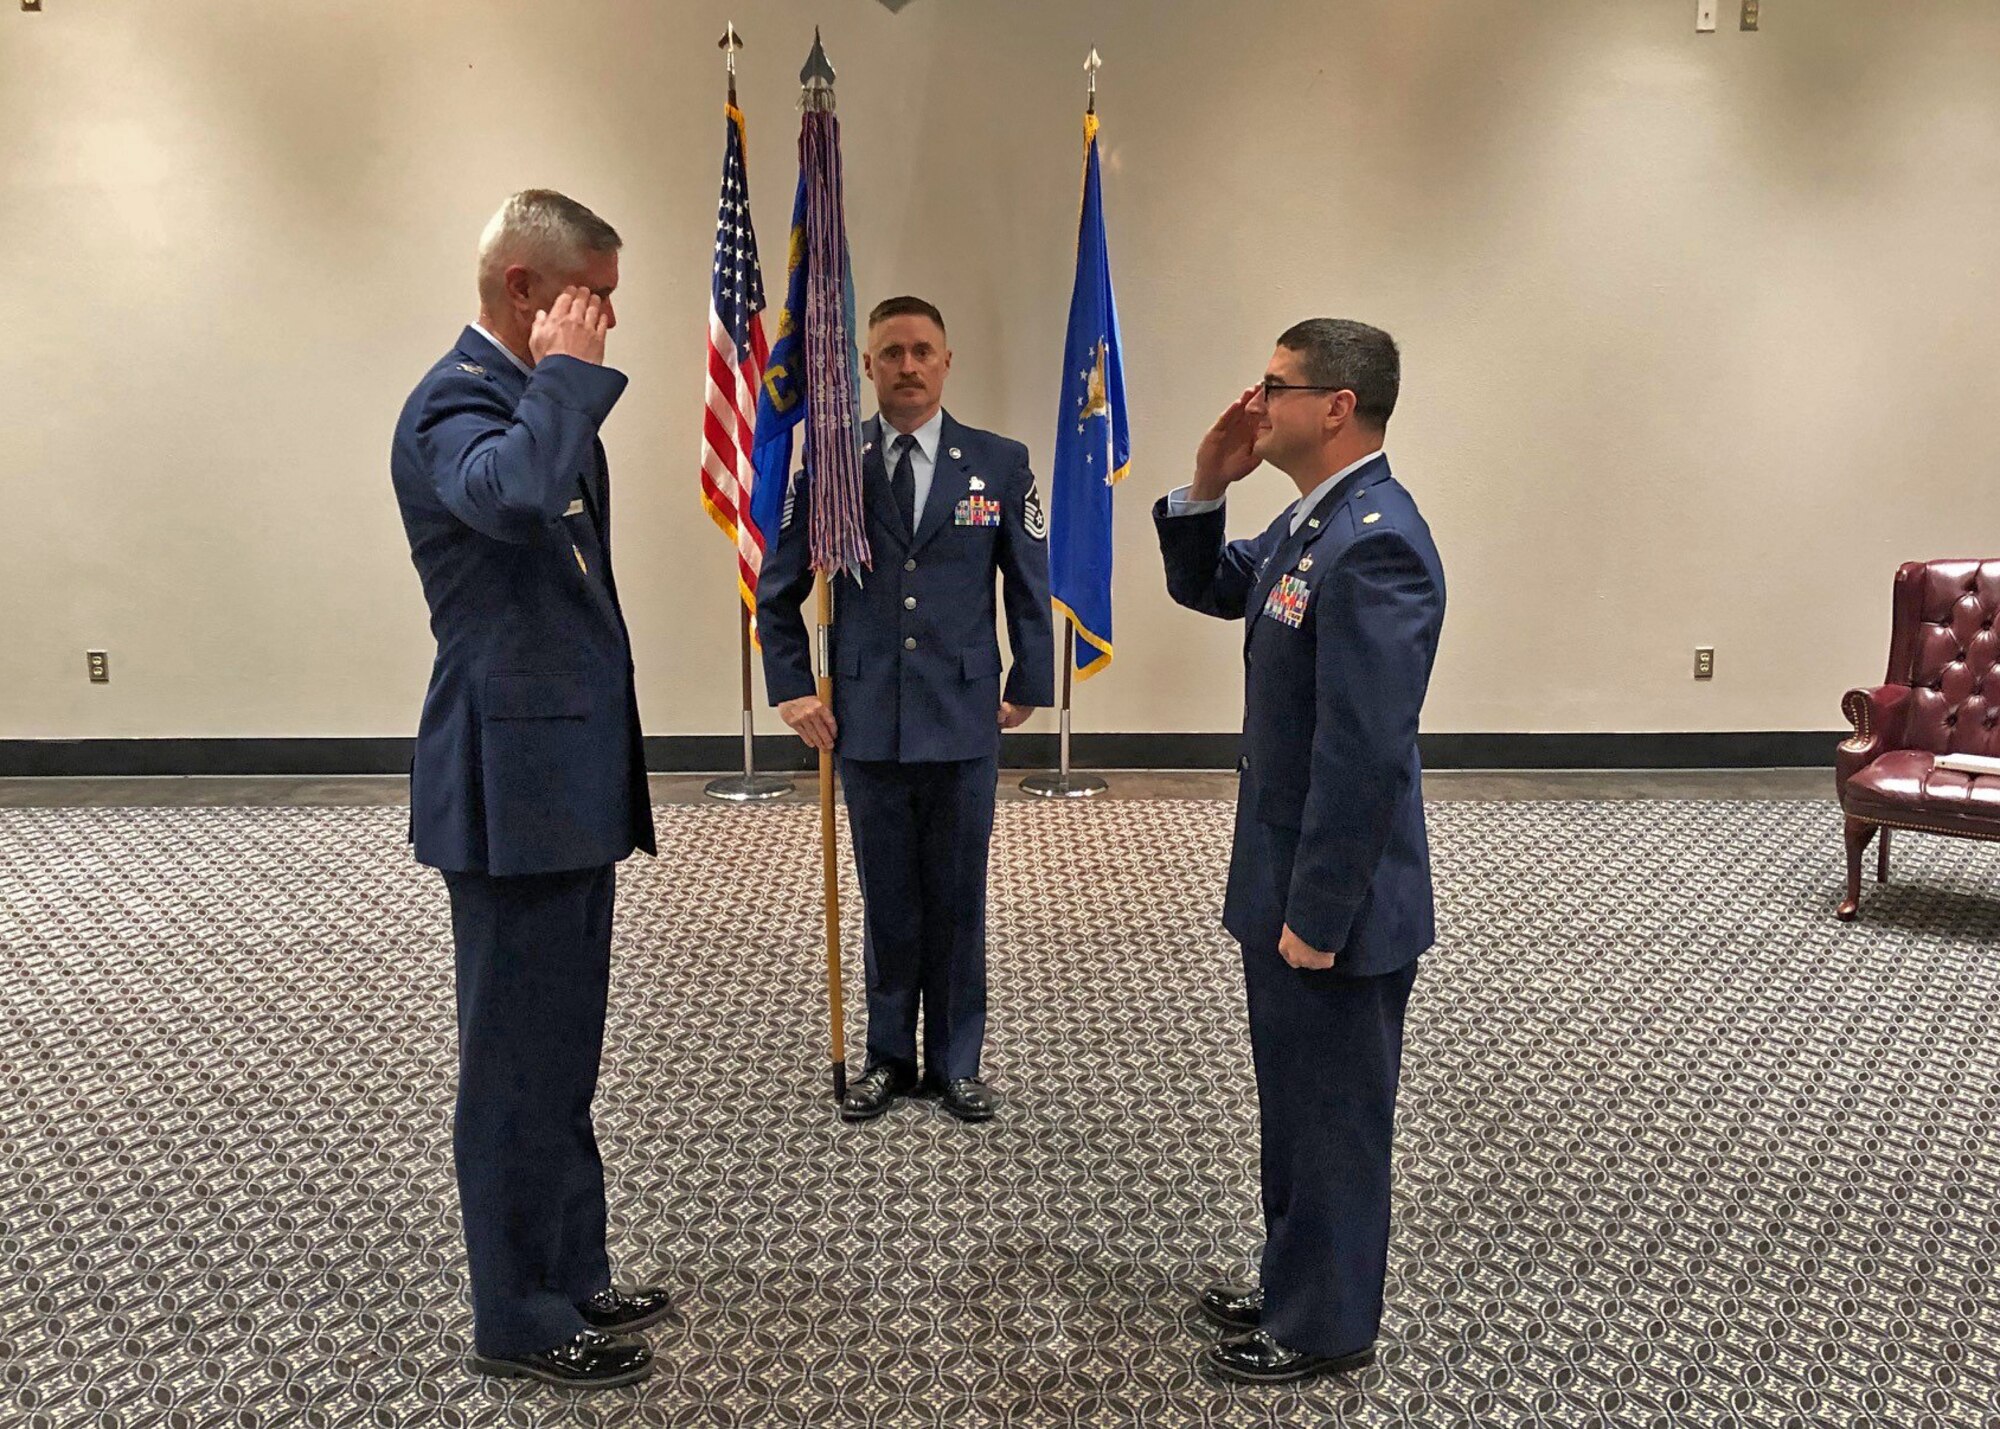 U.S. Air Force Col. Tony England, 17th Mission Support Group commander and Maj. Christopher Higgins, 17th Civil Engineering Squadron incoming commander, salute each other at the 17th CES Assumption of Command ceremony, at the event center on Goodfellow Air Force Base, Texas, June 22, 2020.  The ceremony held less than 10 people to adhere to social distancing and COVID-19 restrictions. (courtesy photo)